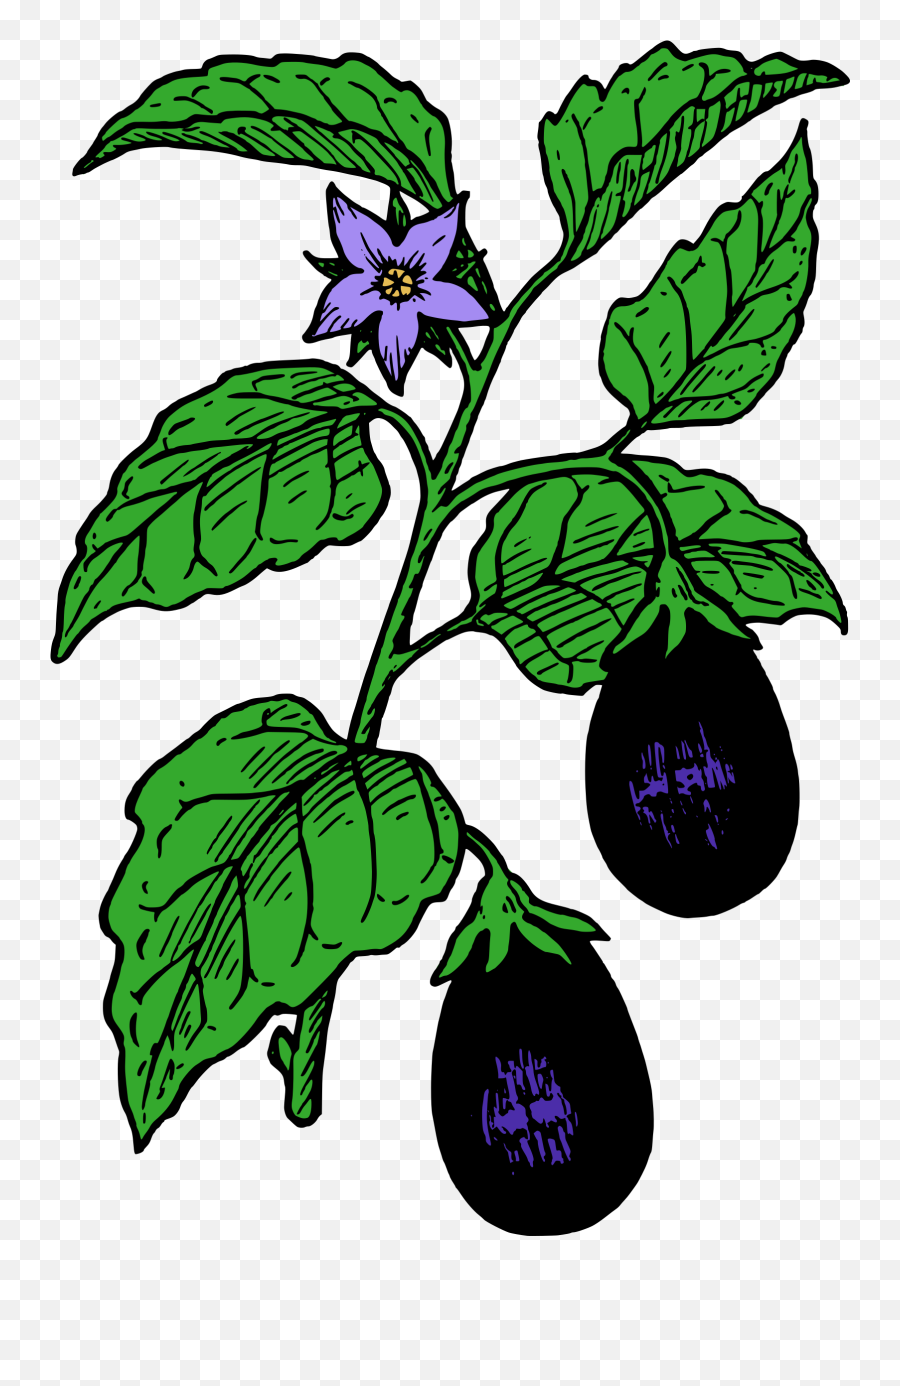 Brinjal Plant Images Drawing - Clip Art Library Brinjal Plant Images Drawing Emoji,Egg Plant Emoticon